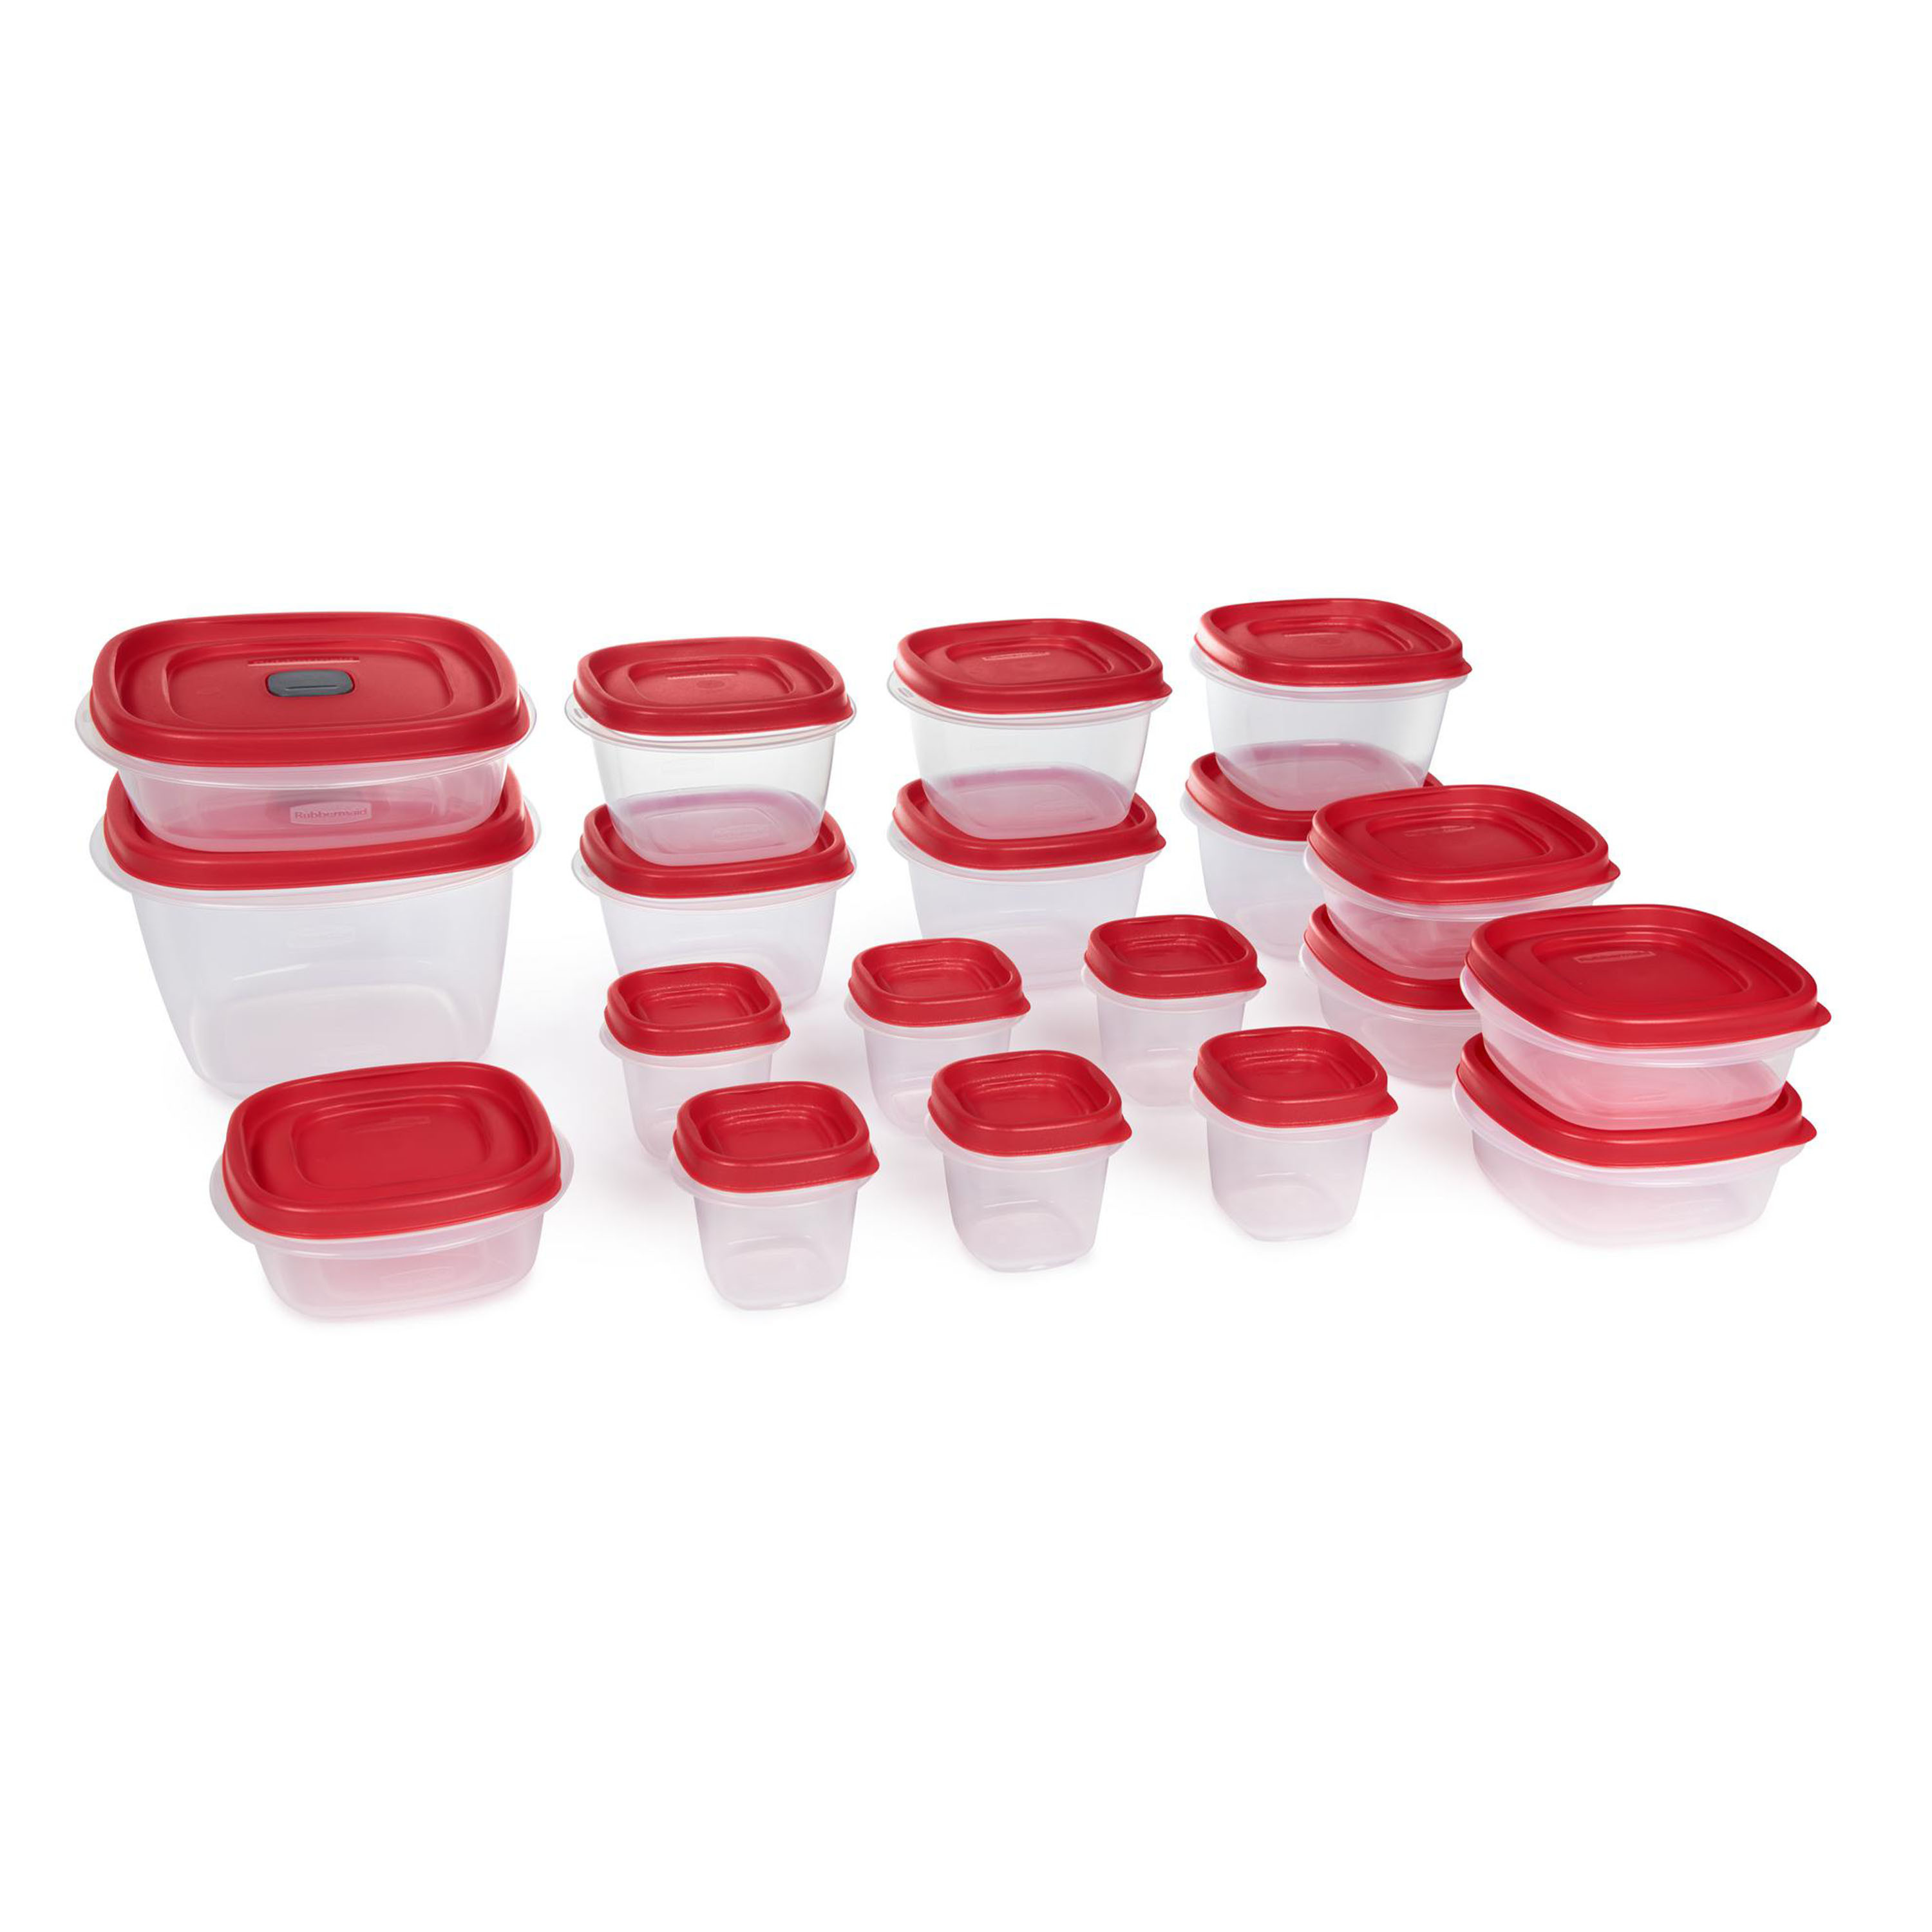 Rubbermaid Easy Find Vented Lids Food Storage Containers, 38-Piece Set, Red - image 1 of 7